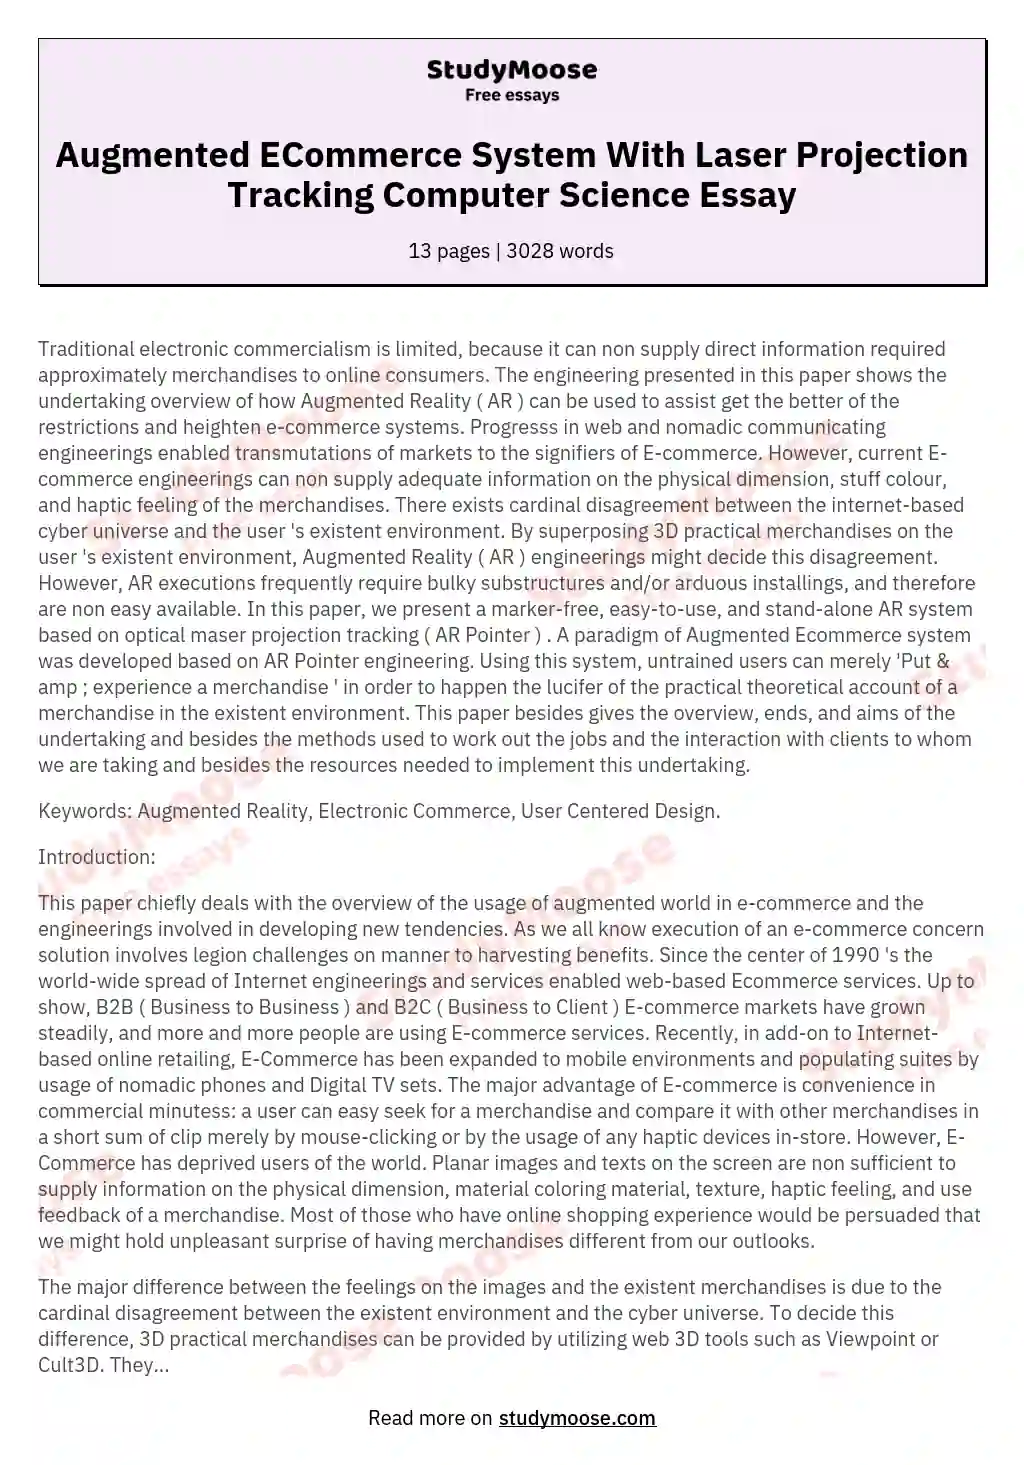 Augmented ECommerce System With Laser Projection Tracking Computer Science Essay